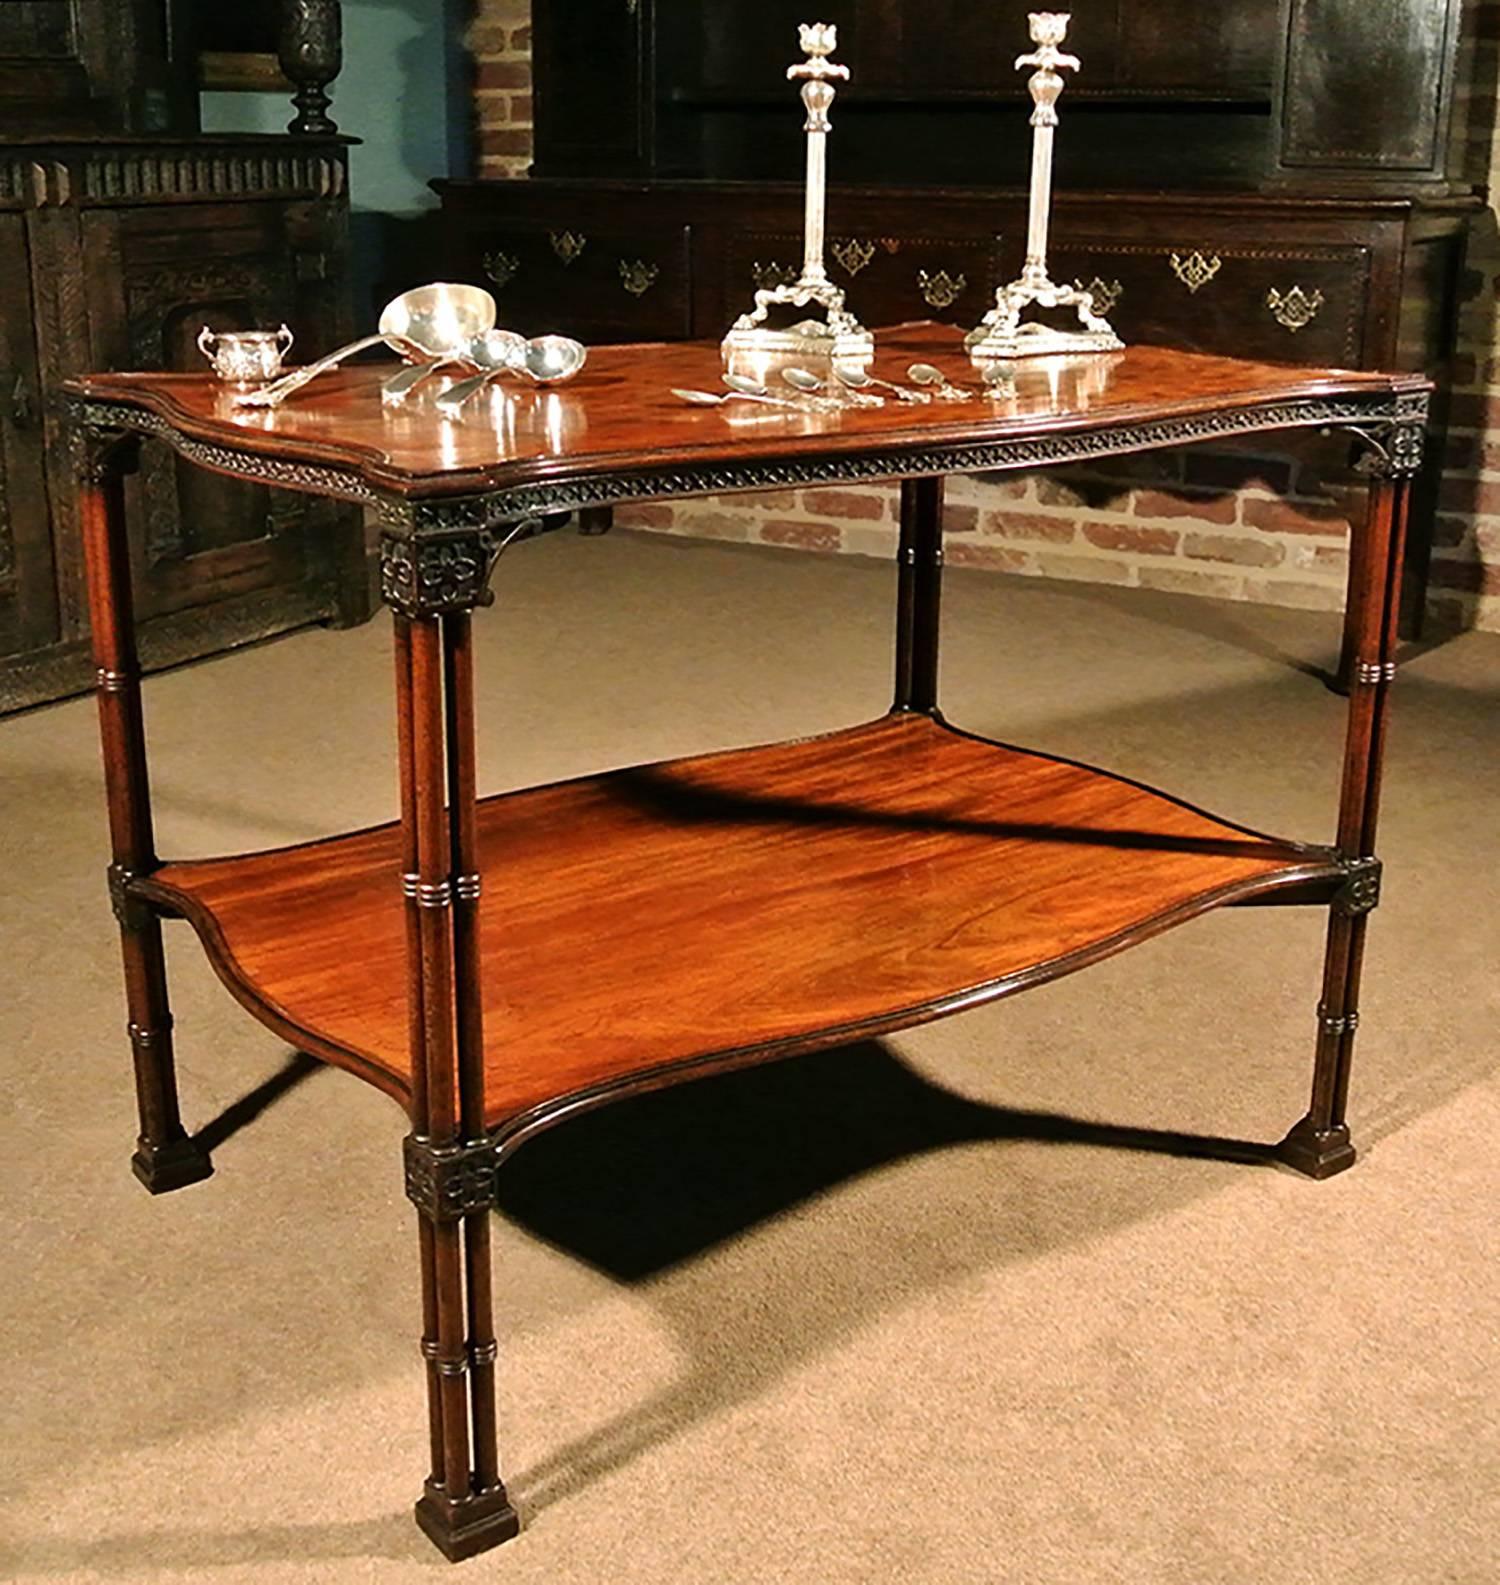 With a superb color, an extremely rare and fine example of a solid mahogany silver table, circa 1760 in the manner of Thomas Chippendale.

The two solid mahogany serpentine shaped tiers set on finely ring turned cluster column legs. The upper tier